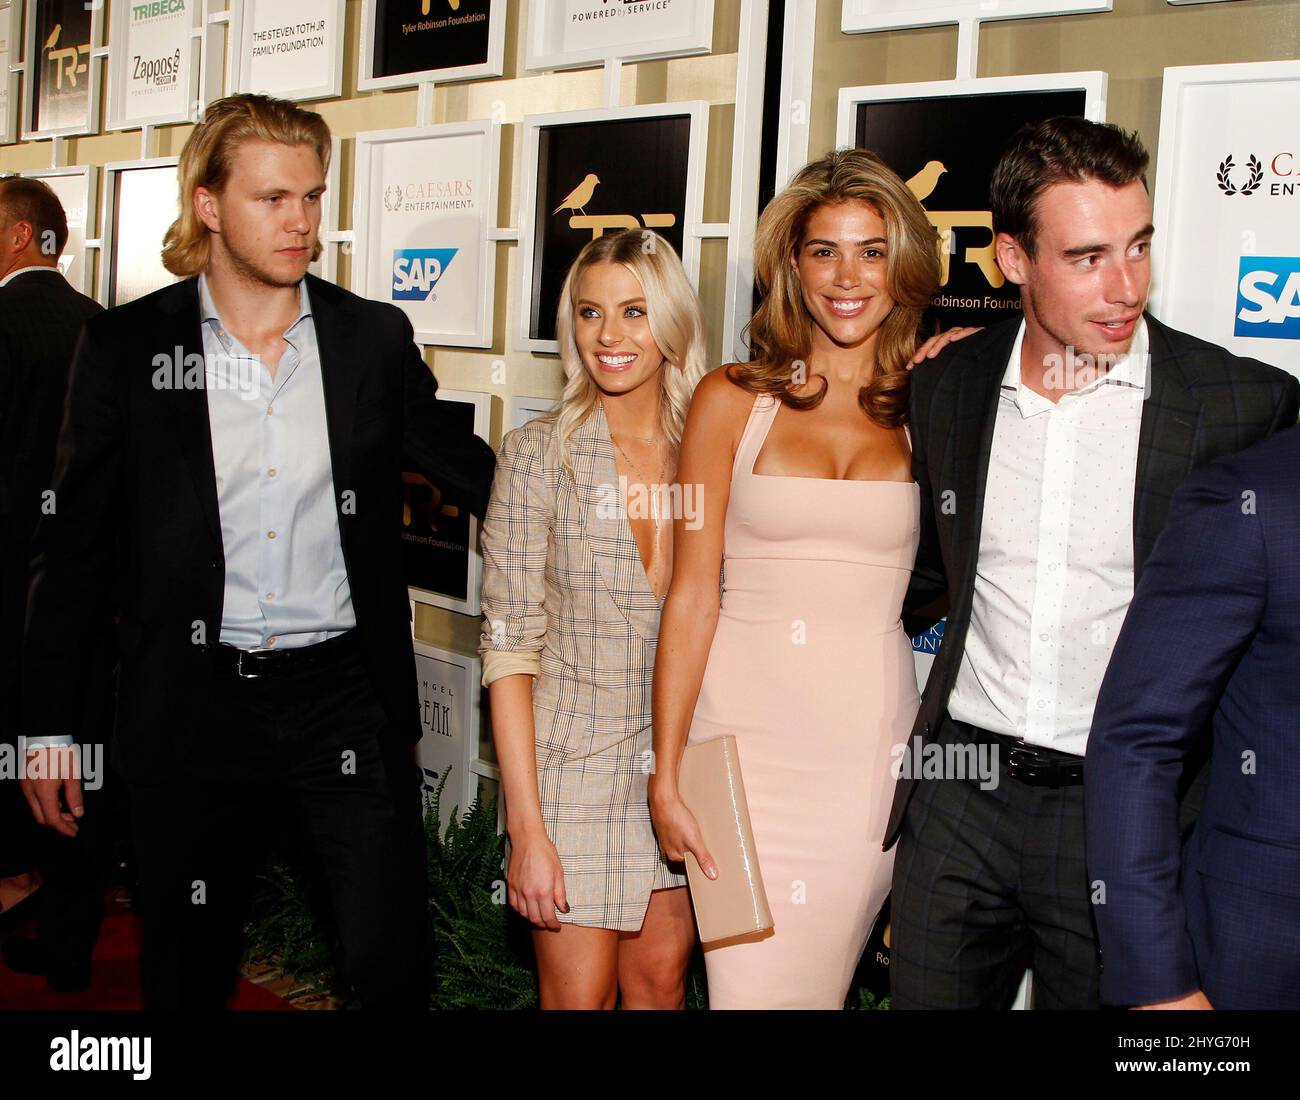 https://c8.alamy.com/comp/2HYG70H/william-karlsson-emily-ferguson-melissa-ponte-reilly-smith-attending-the-rise-up-gala-to-benefit-the-tyler-robinson-foundation-trf-held-at-caesars-palace-2HYG70H.jpg